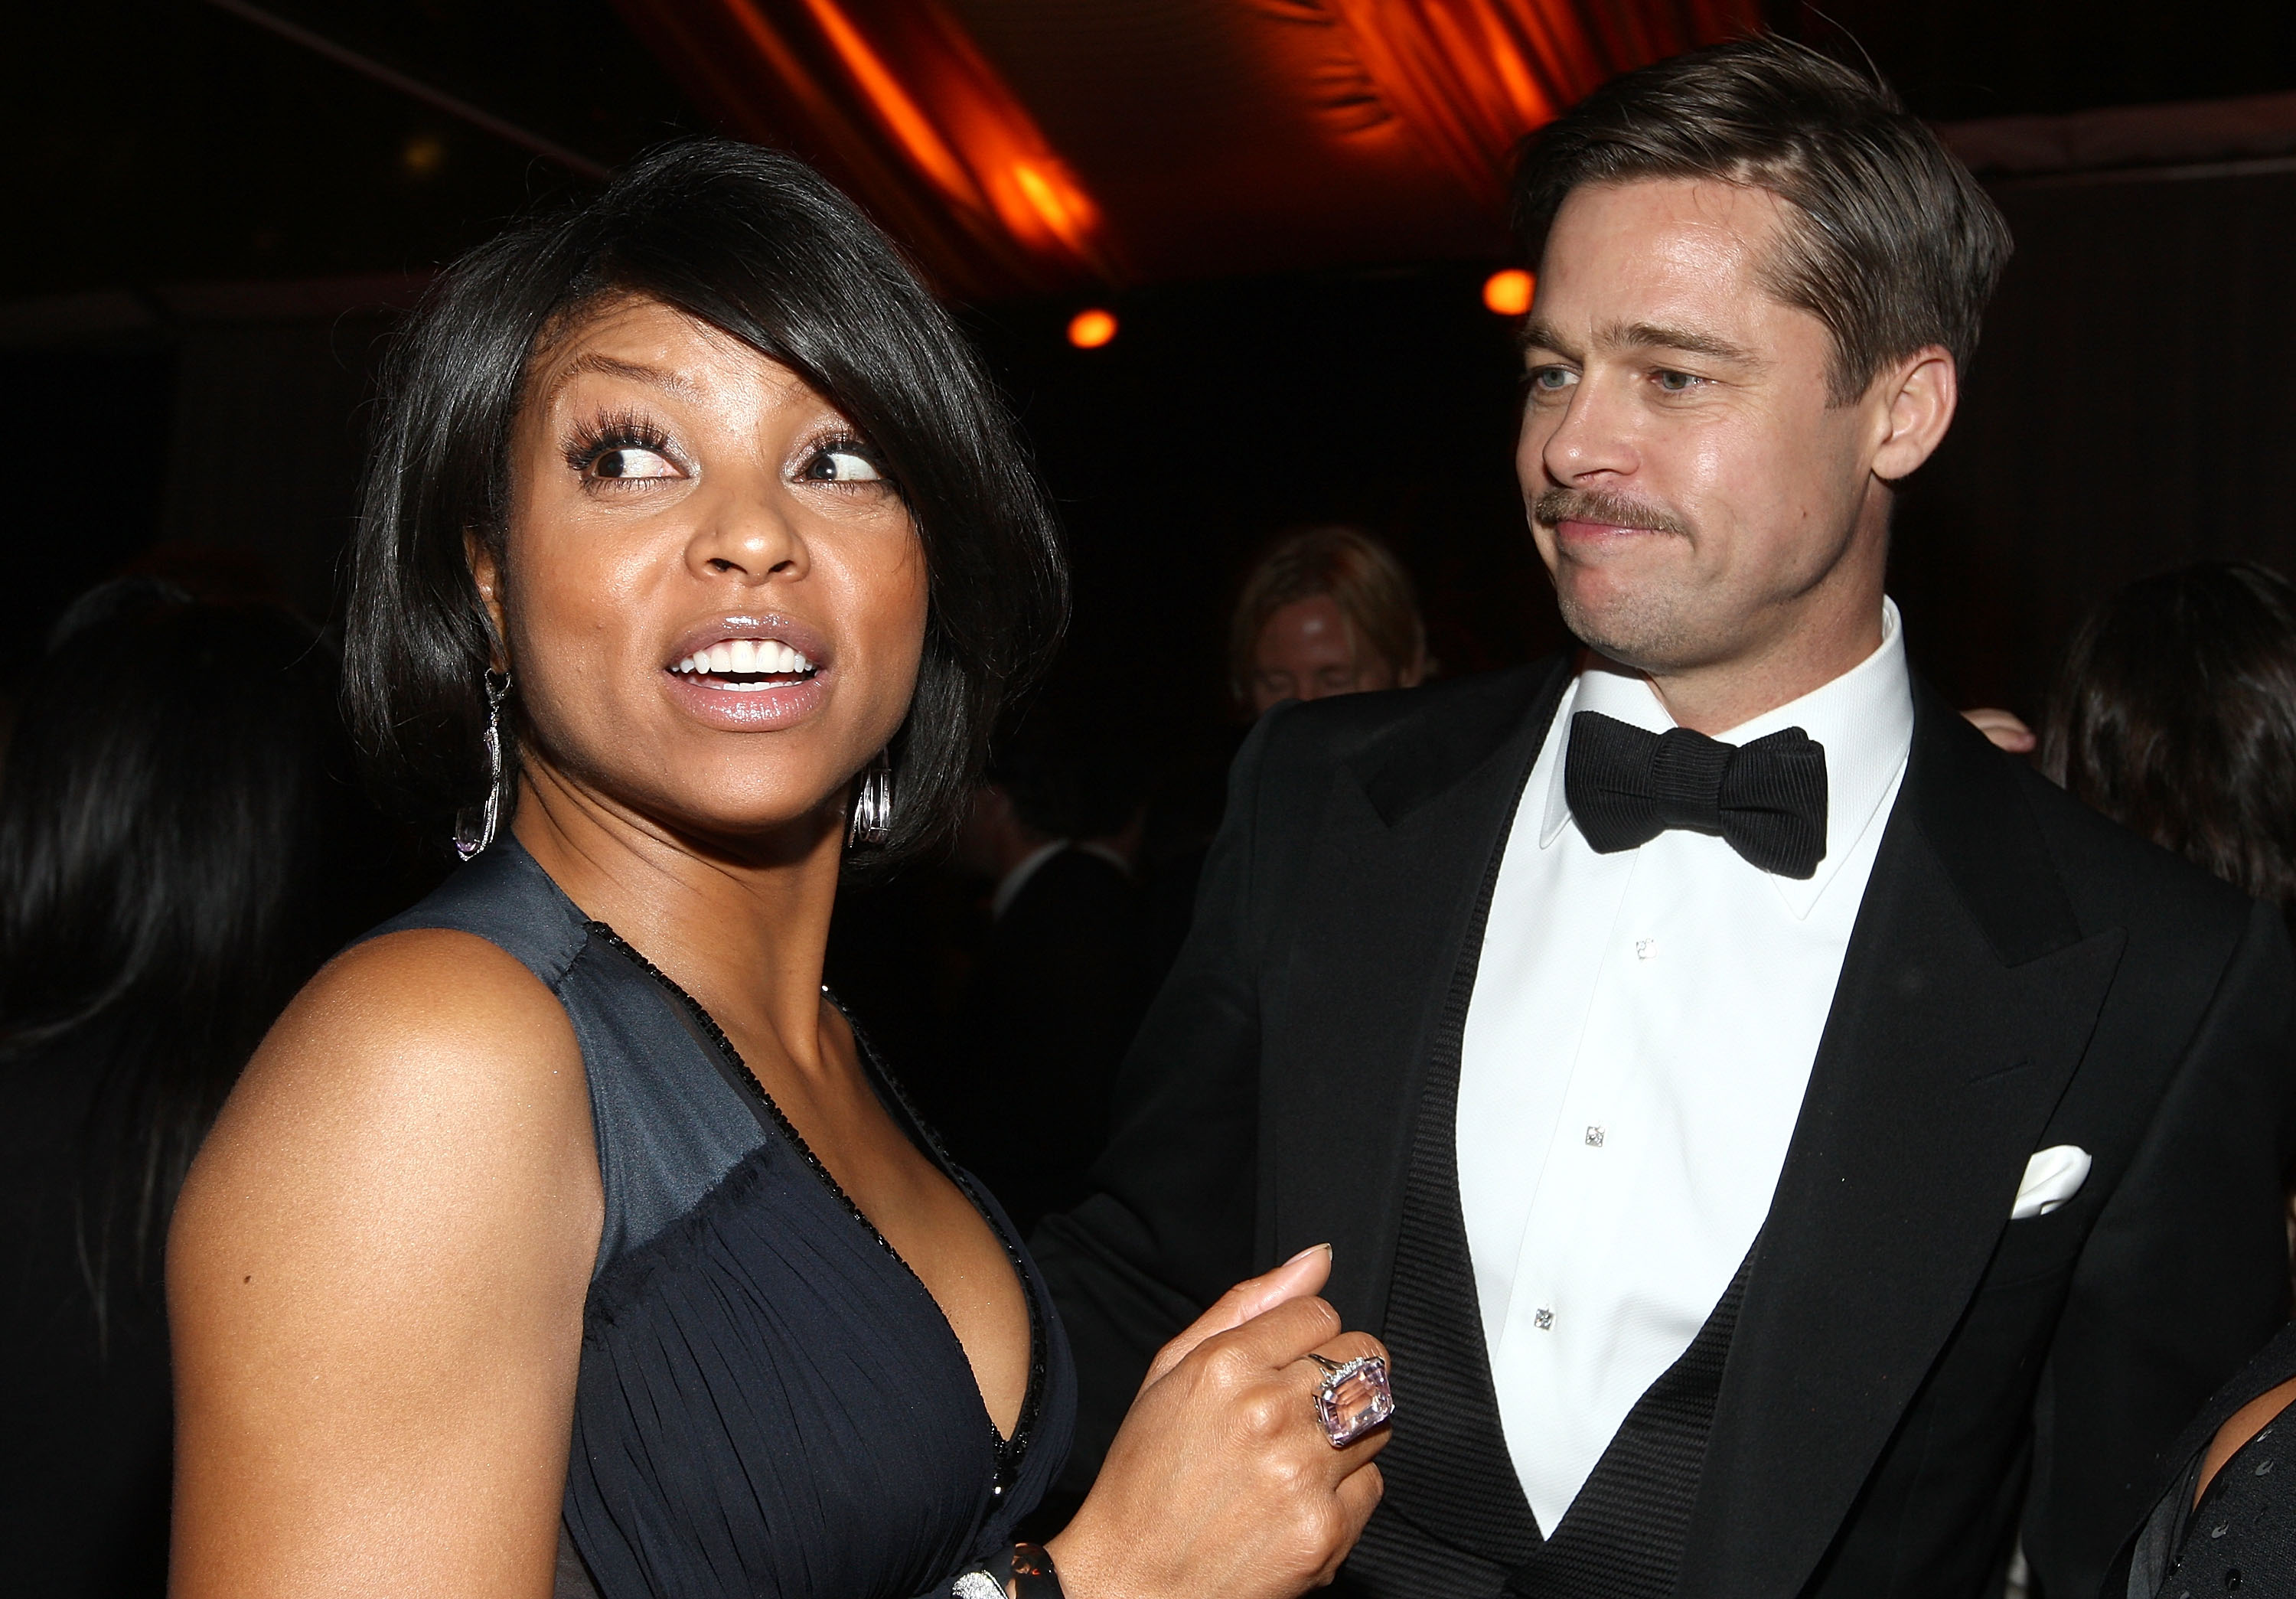 Taraji P. Henson Was Only Paid Around  $40K For “Benjamin Button” Role